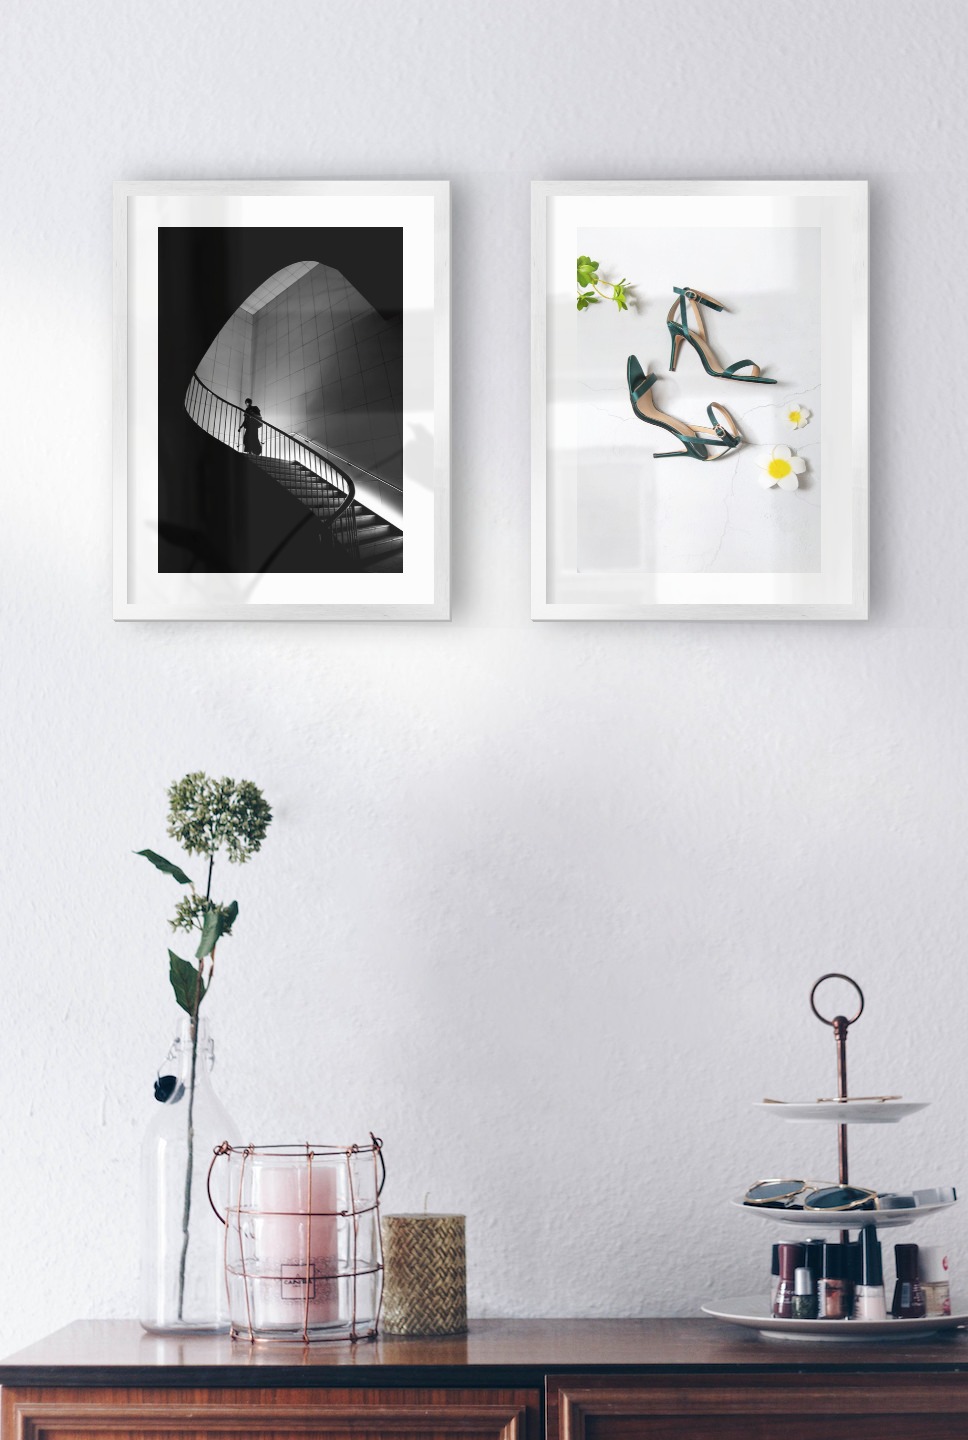 Gallery wall with picture frames in silver in sizes 30x40 with prints "Staircase" and "Heels"